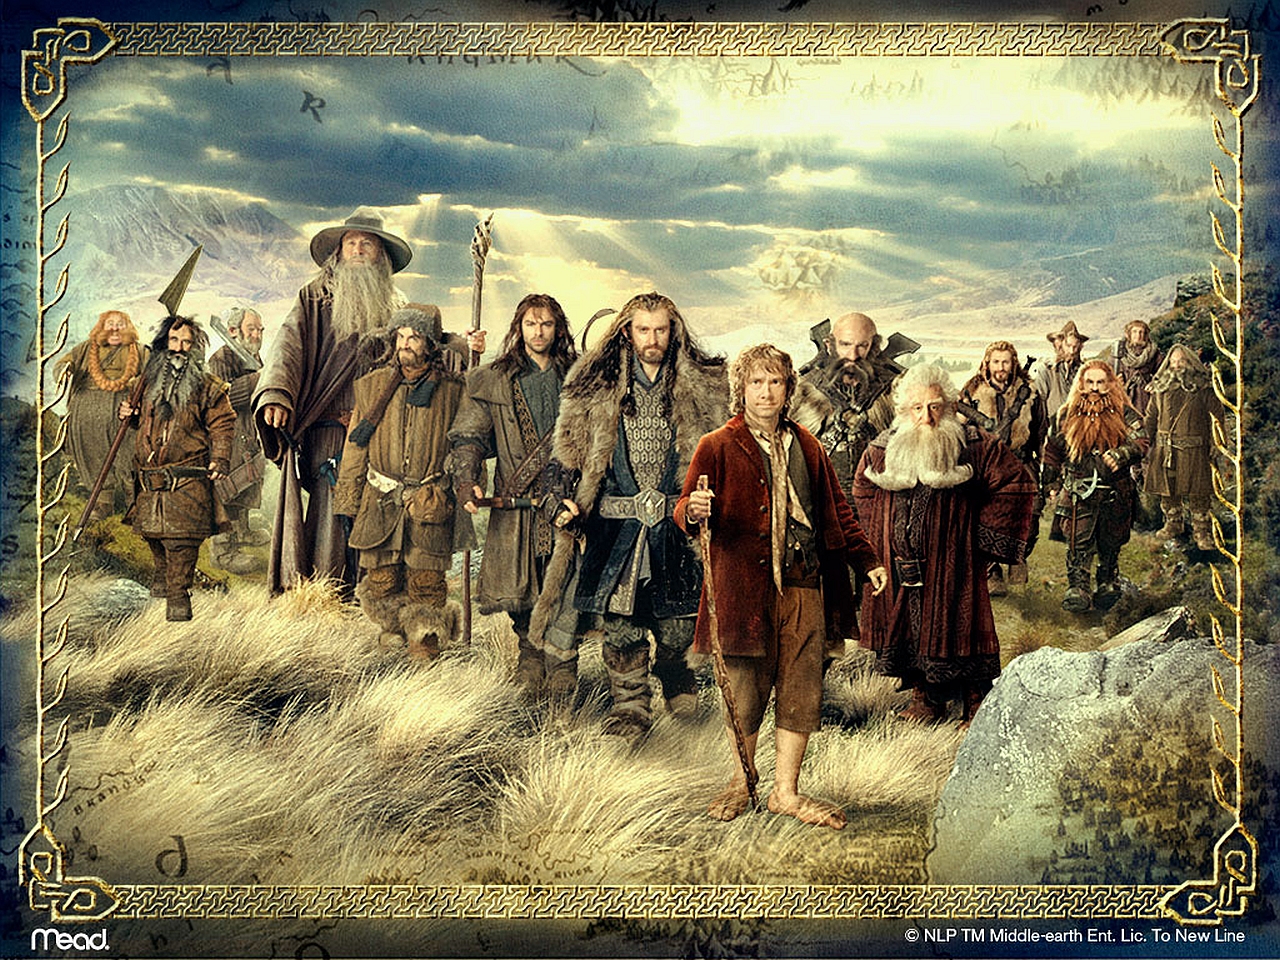 1317832 The Hobbit An Unexpected Journey 4K  Rare Gallery HD Wallpapers